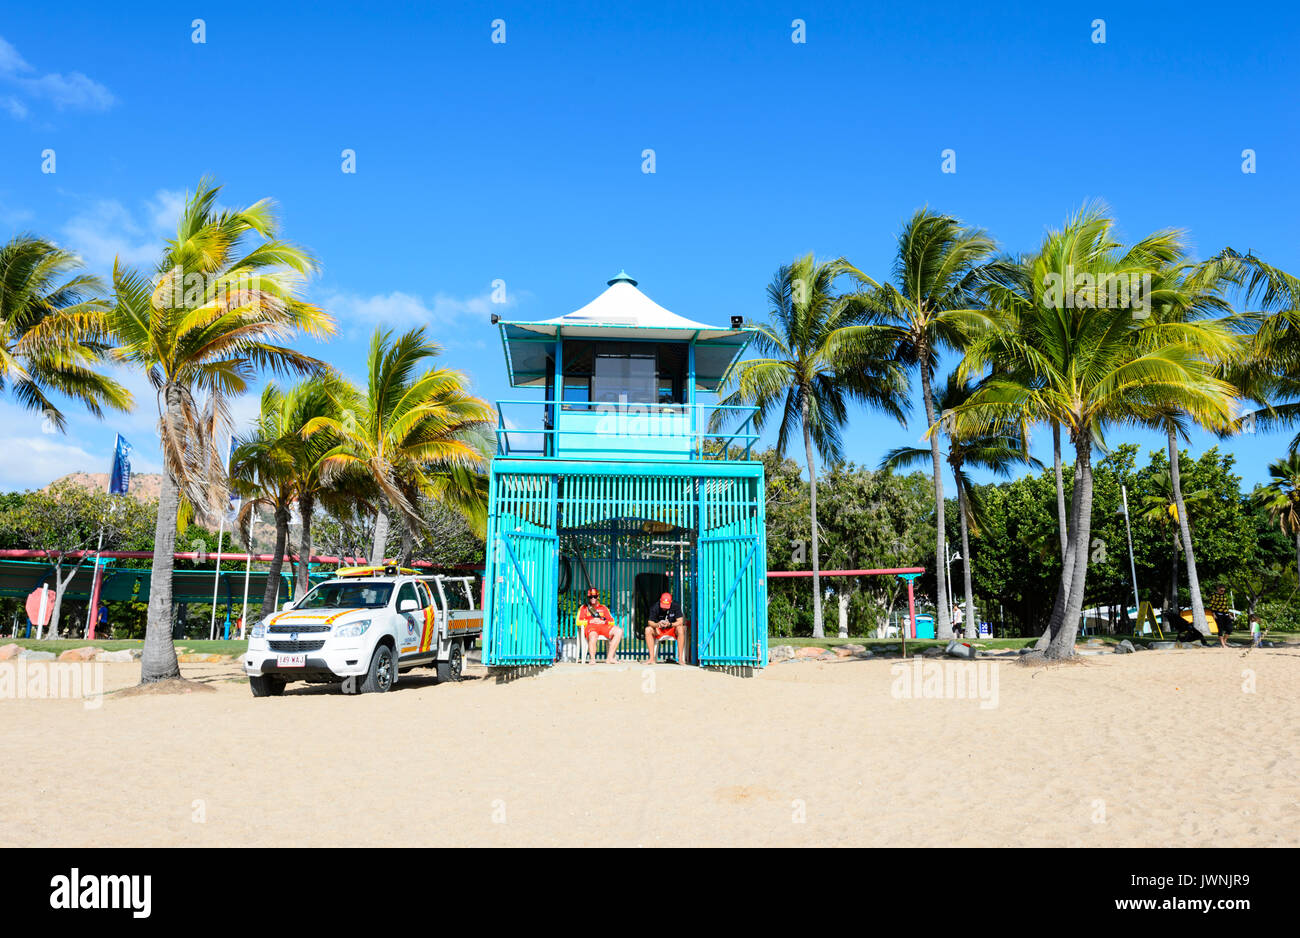 Turquoise Lifeguard Hut on scenic tropical sandy beach with palm trees, Townsville, Queensland, QLD, Australia Stock Photo